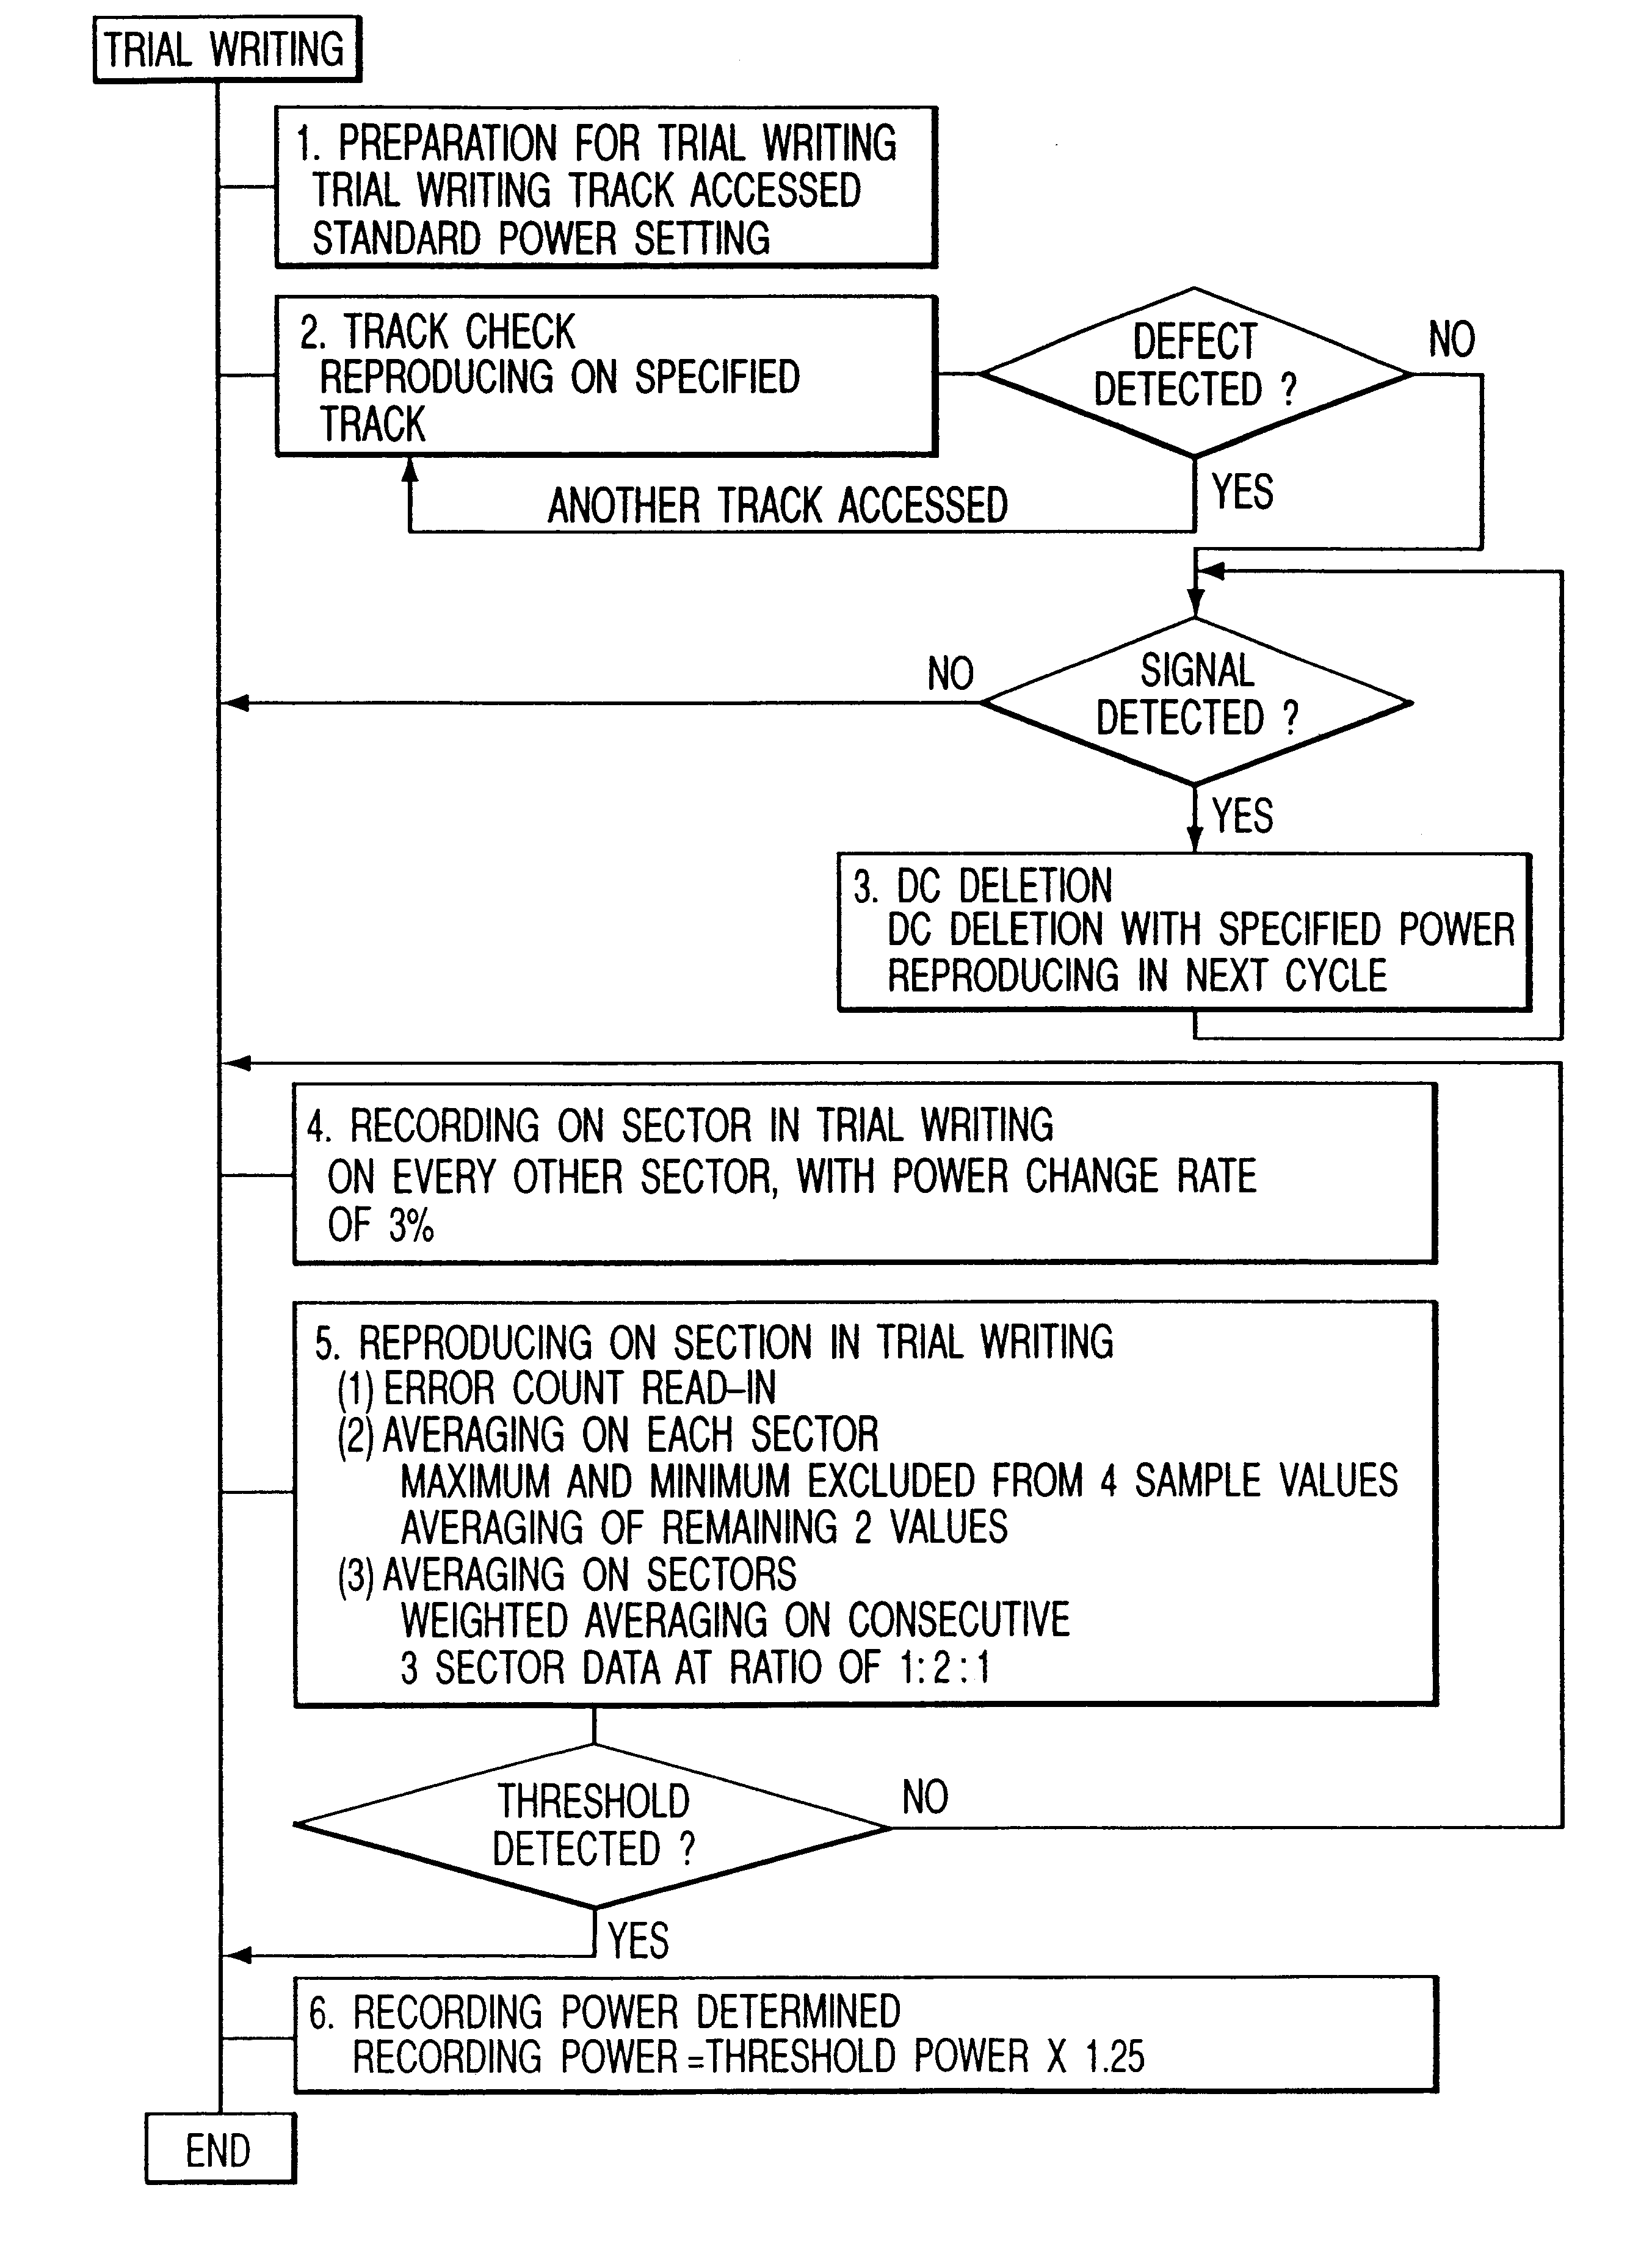 Arrangements for using detected phase differences for setting laser power levels